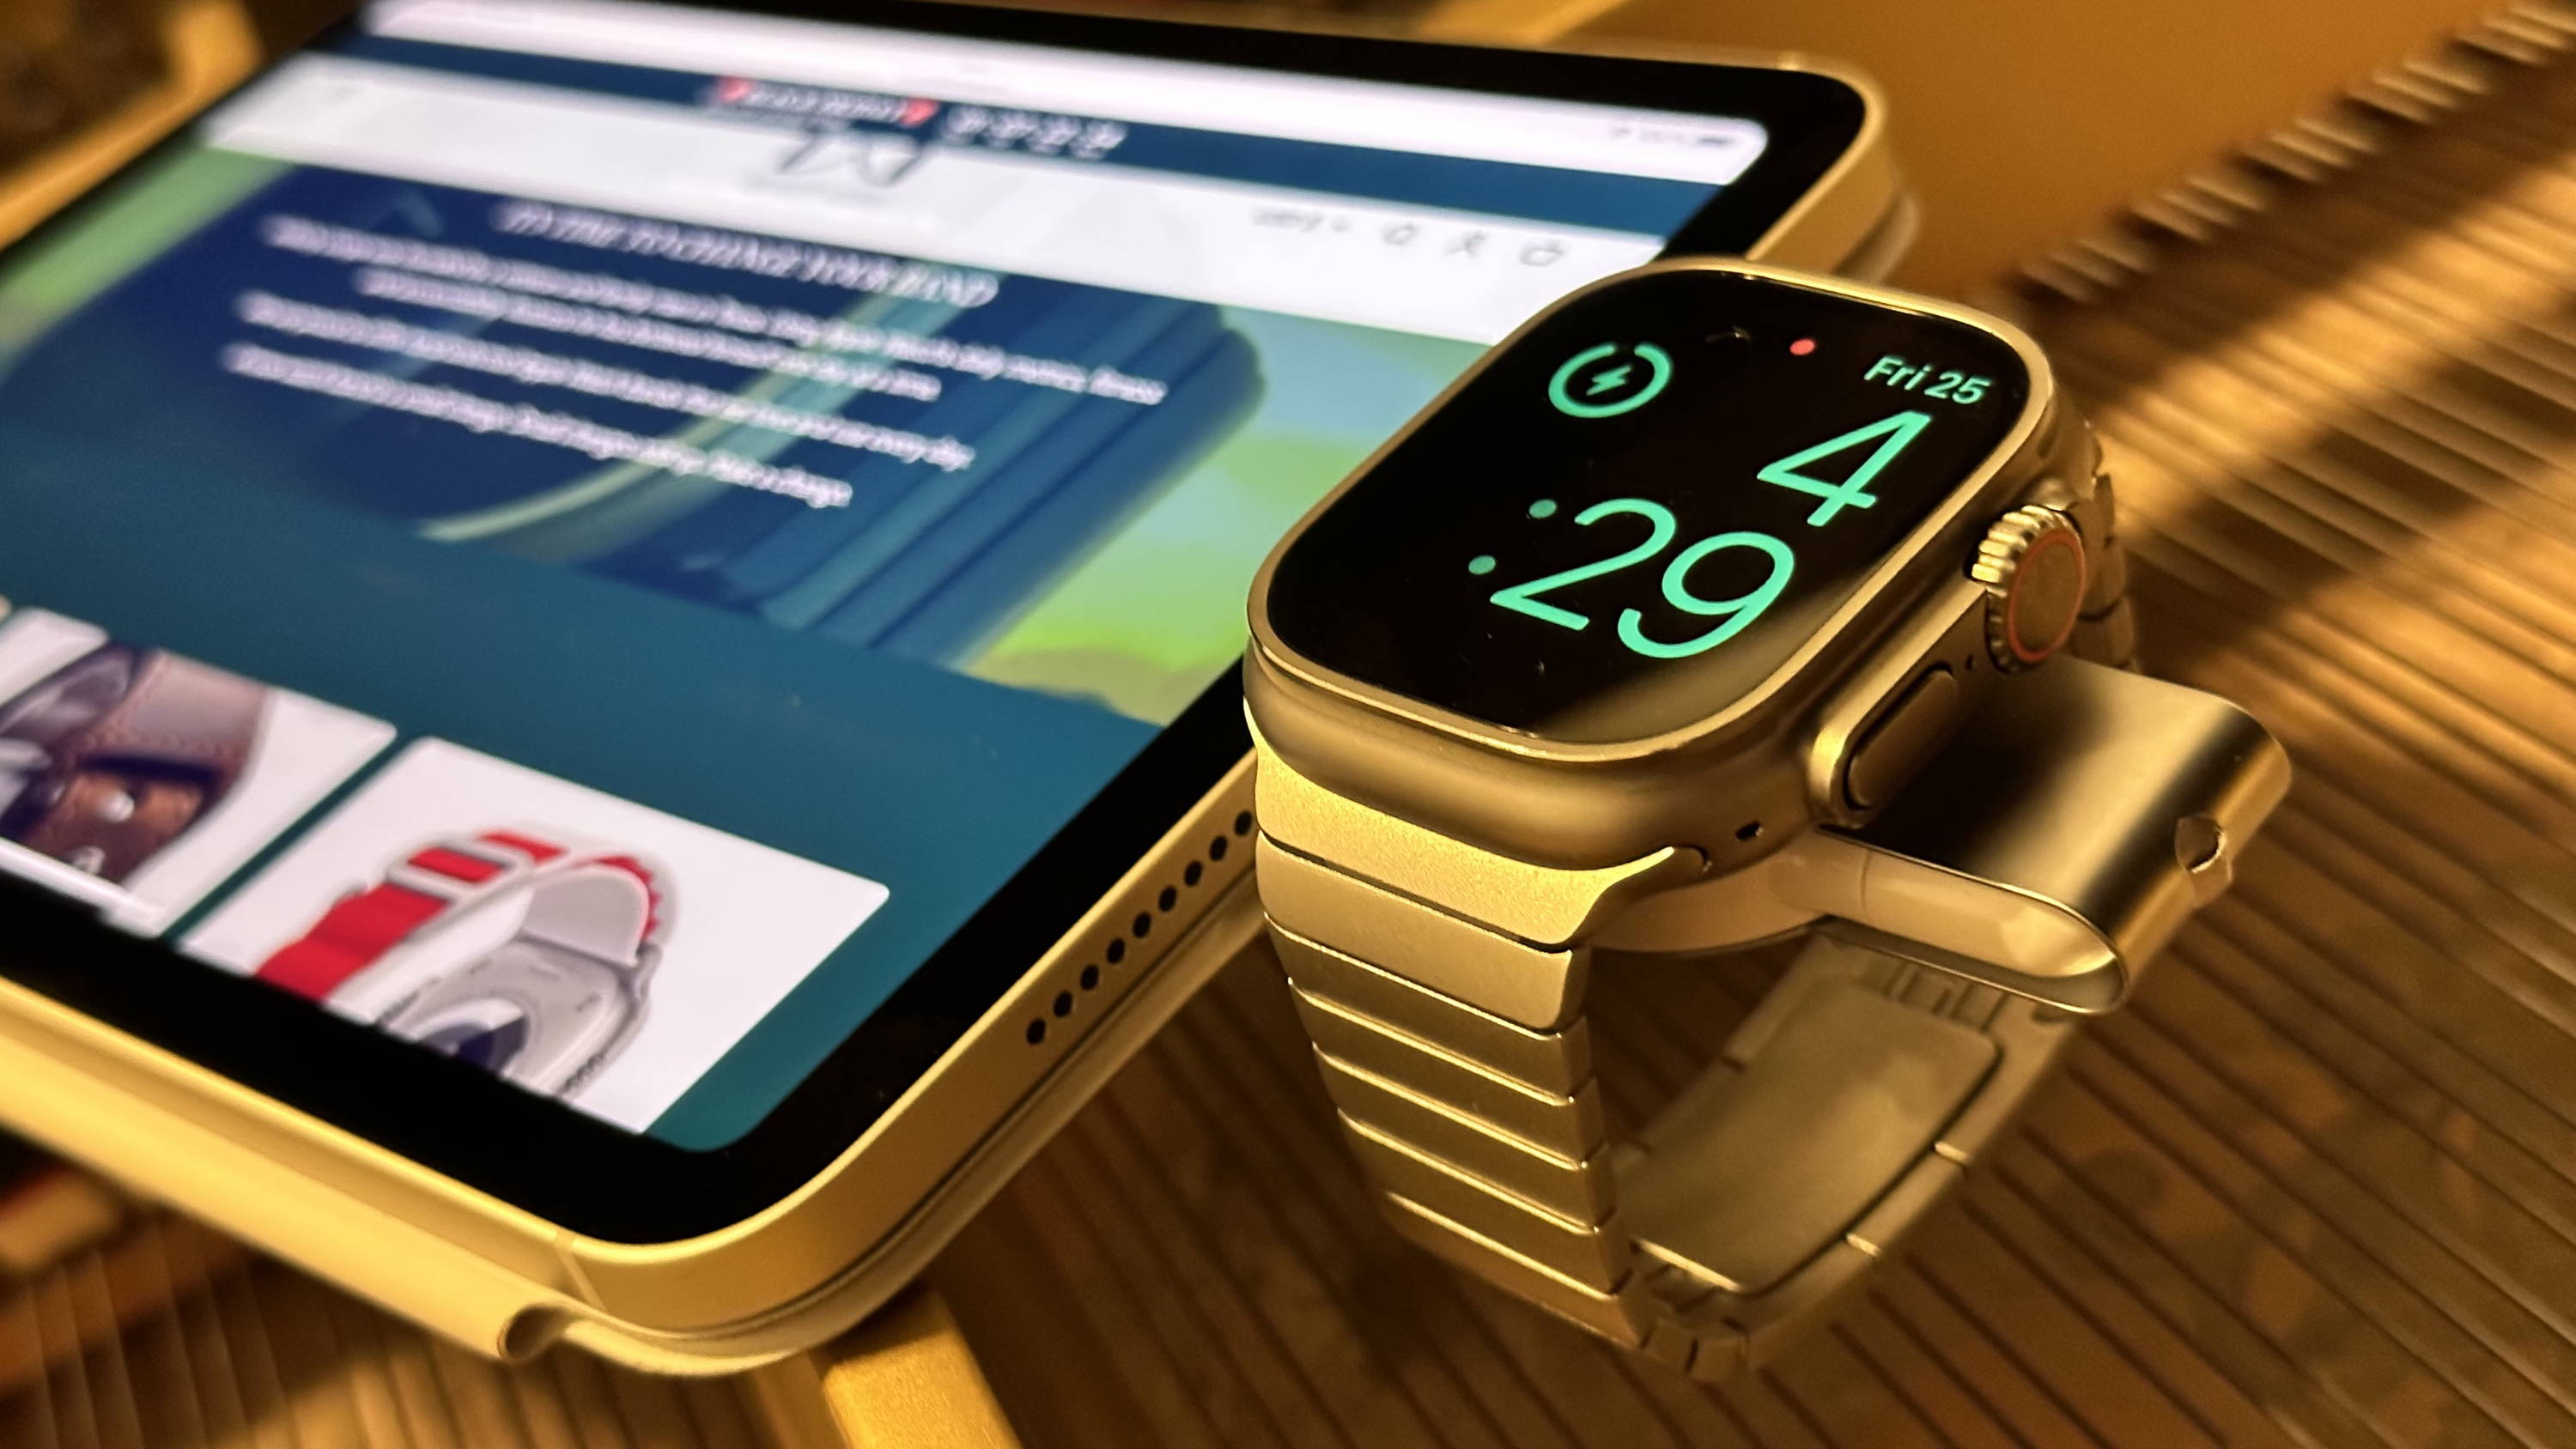 Apple Watch Accessories from Infinity Loops